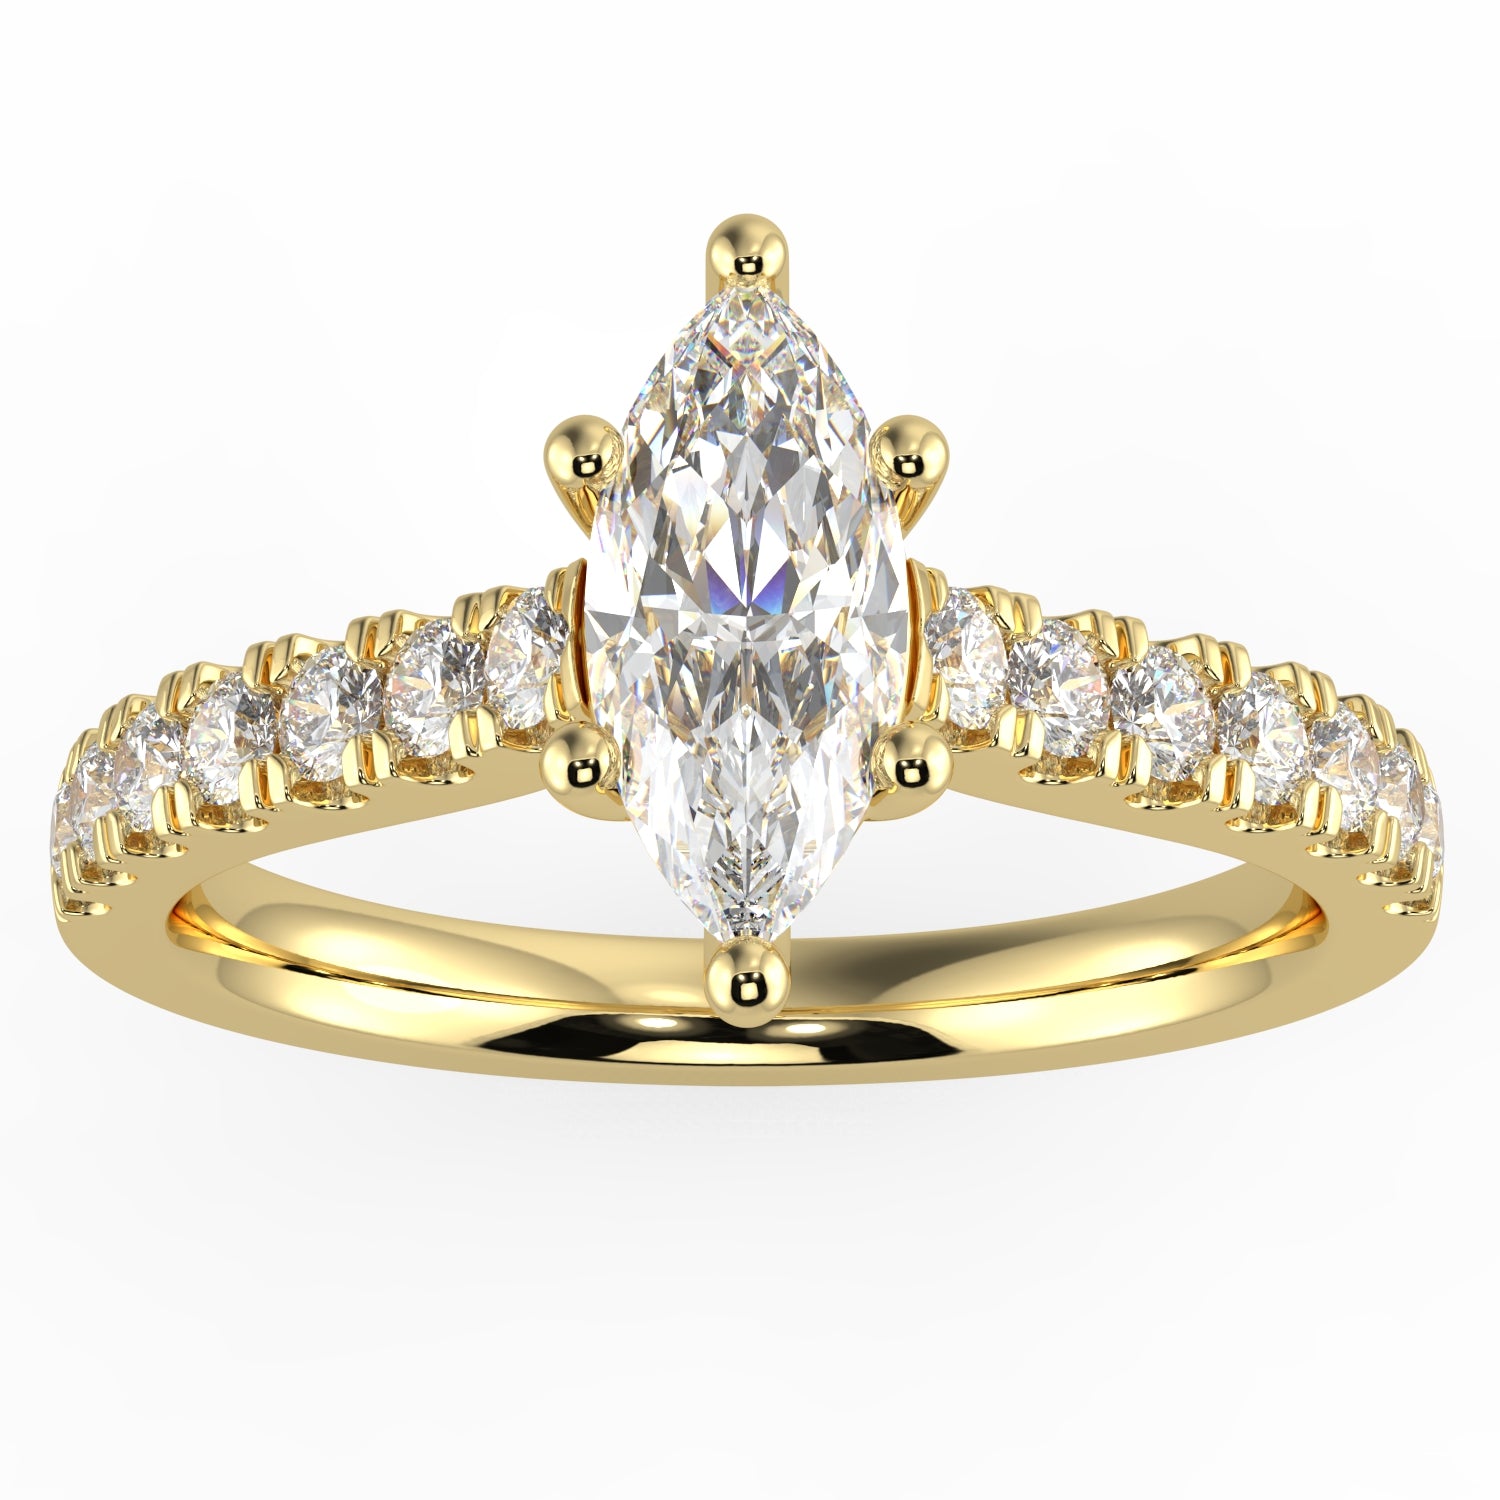 Natural Diamond Slim Shank Ring with 0.70ctw Marquise Shape Center & 0.30 Round Side GHI1 Stones Set on 14K Gold